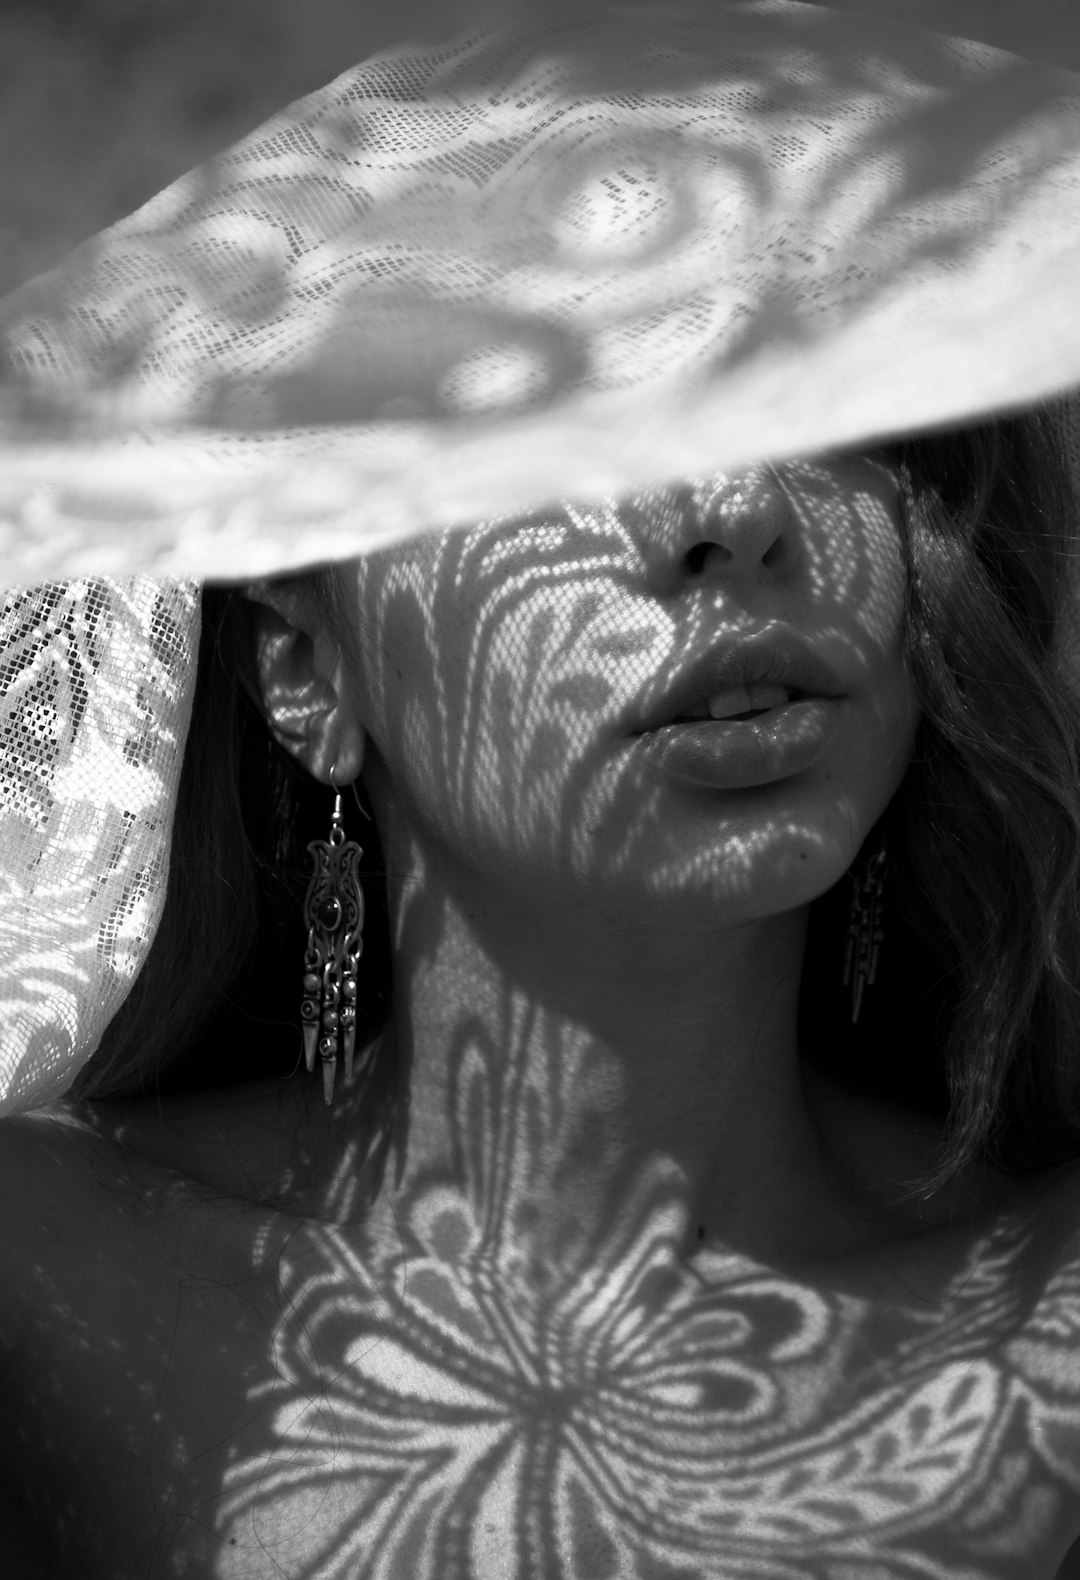 grayscale photography of woman using a floral lace cloth as cover on her face